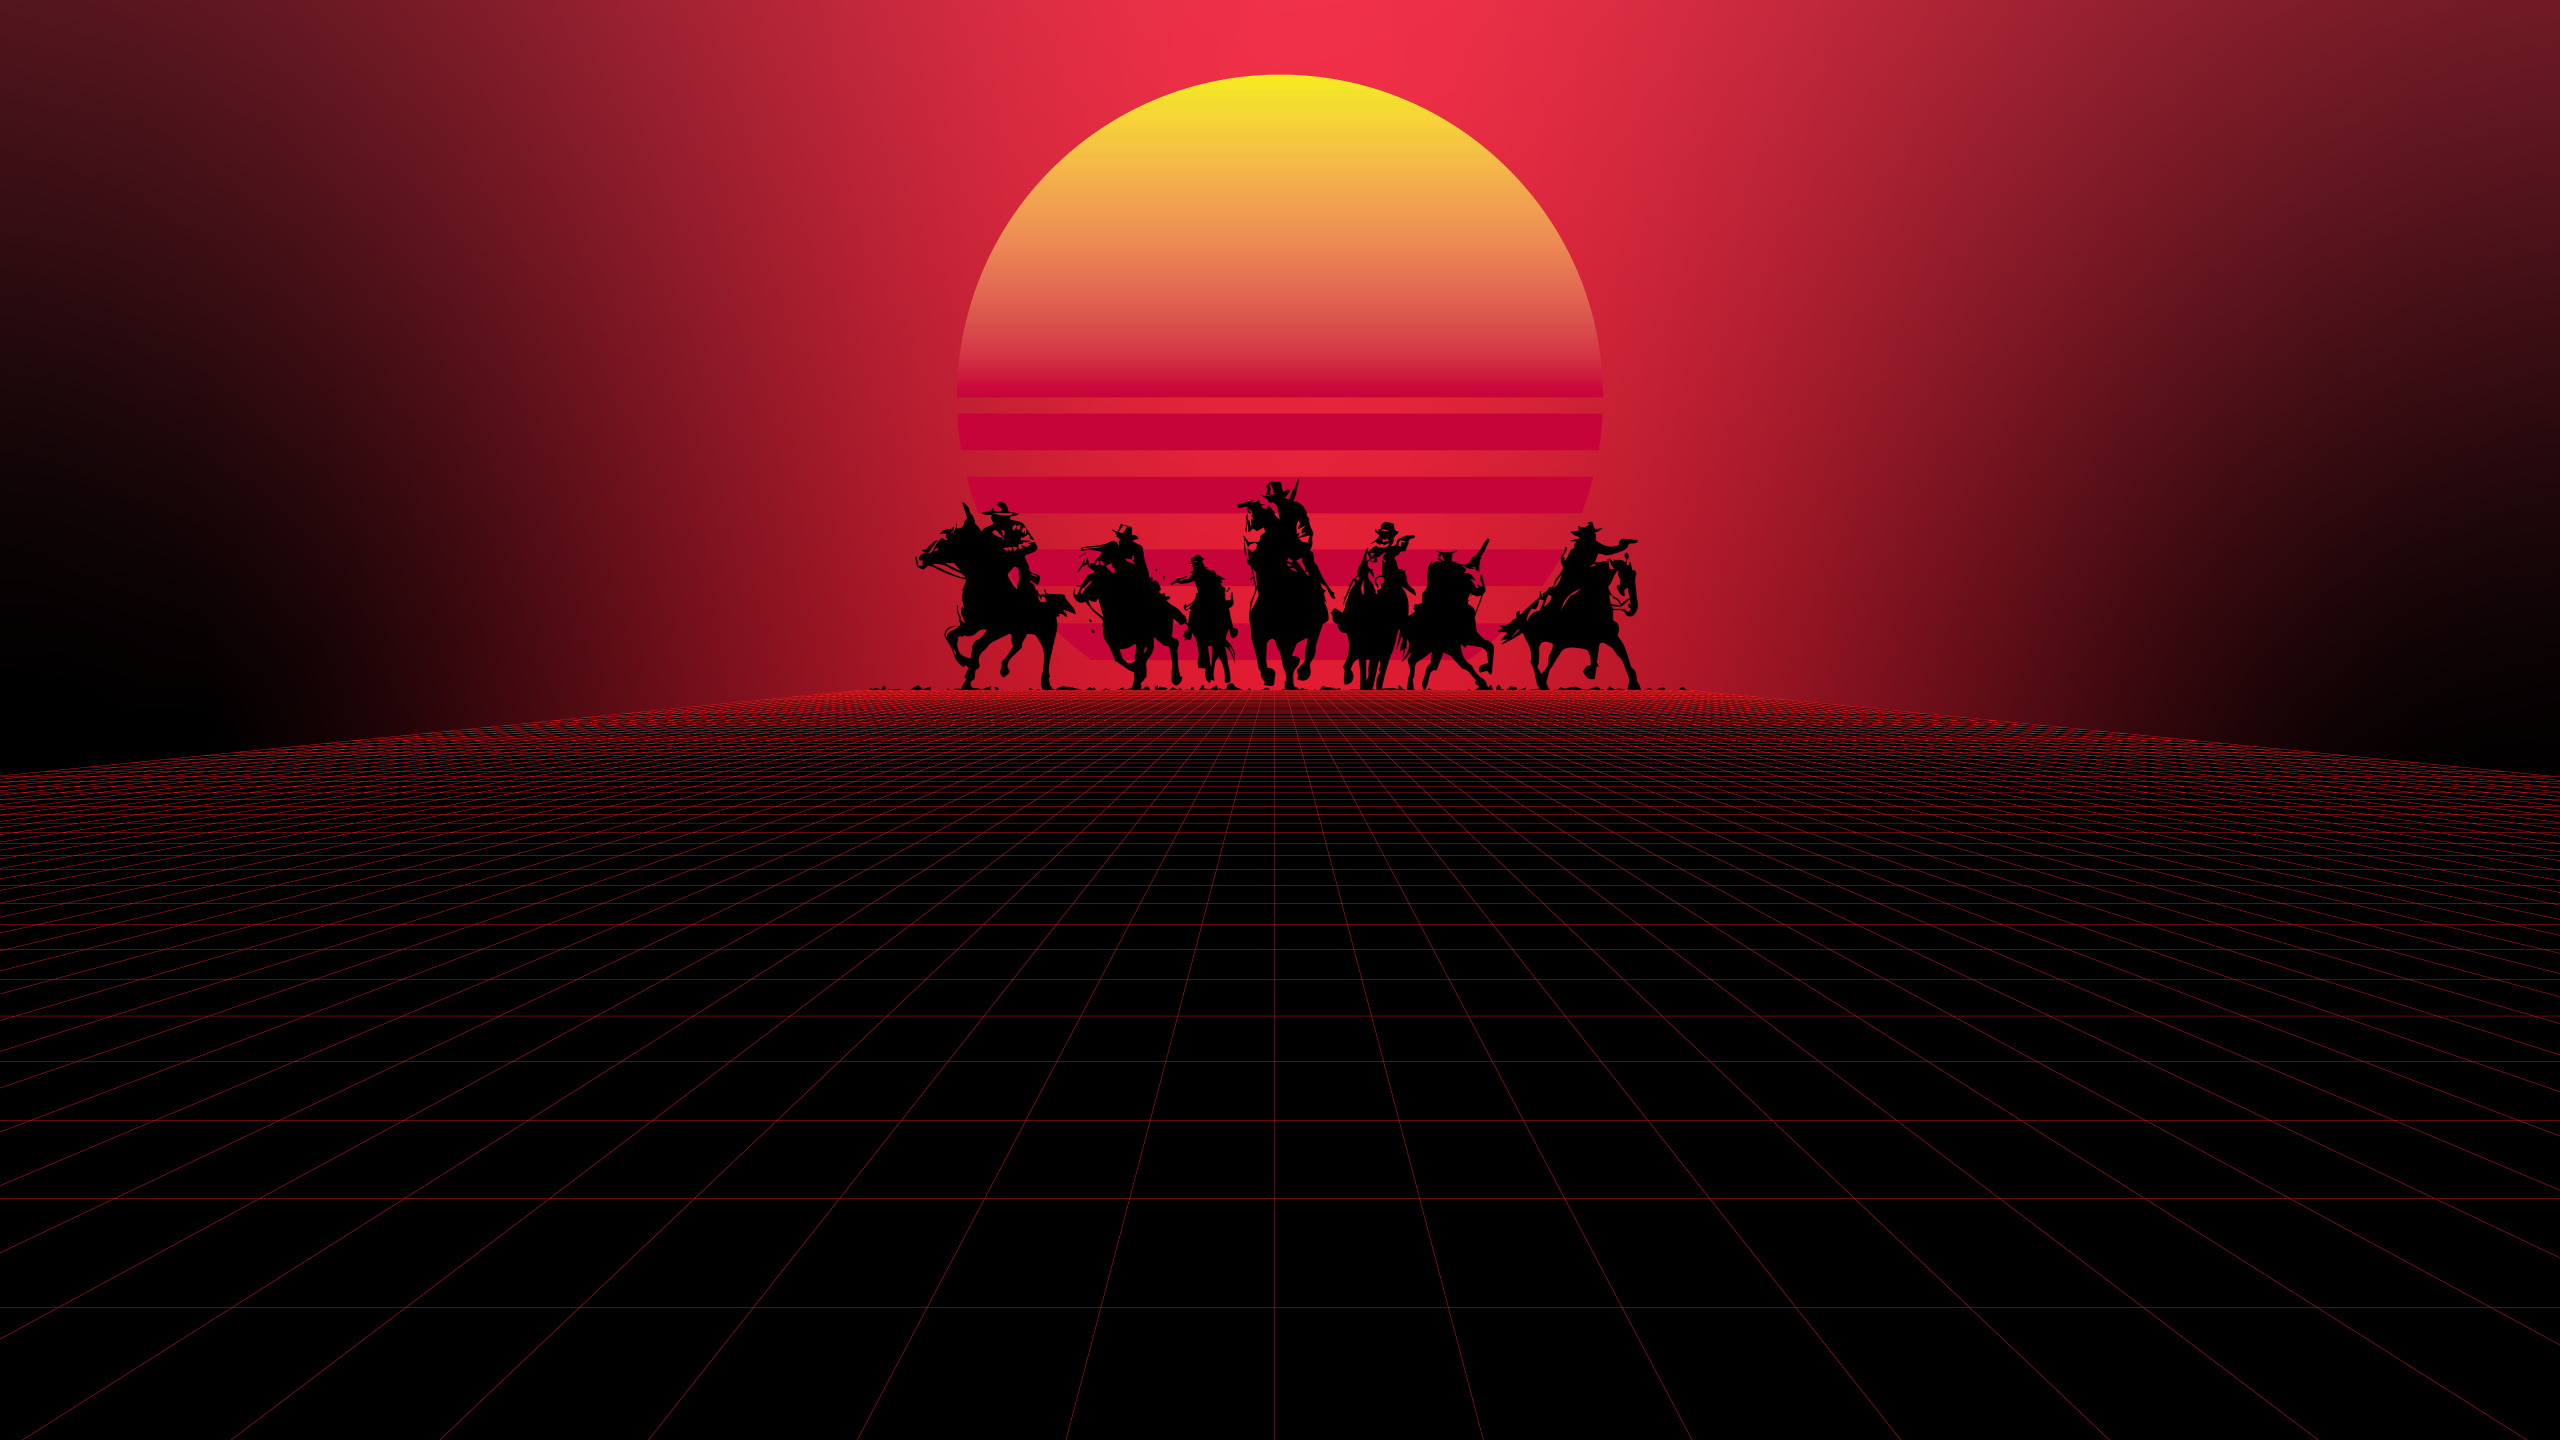 Red Dead Redemption, Red Dead Redemption 2, Red, Silhouette, Pack Animal. Wallpaper in 2560x1440 Resolution